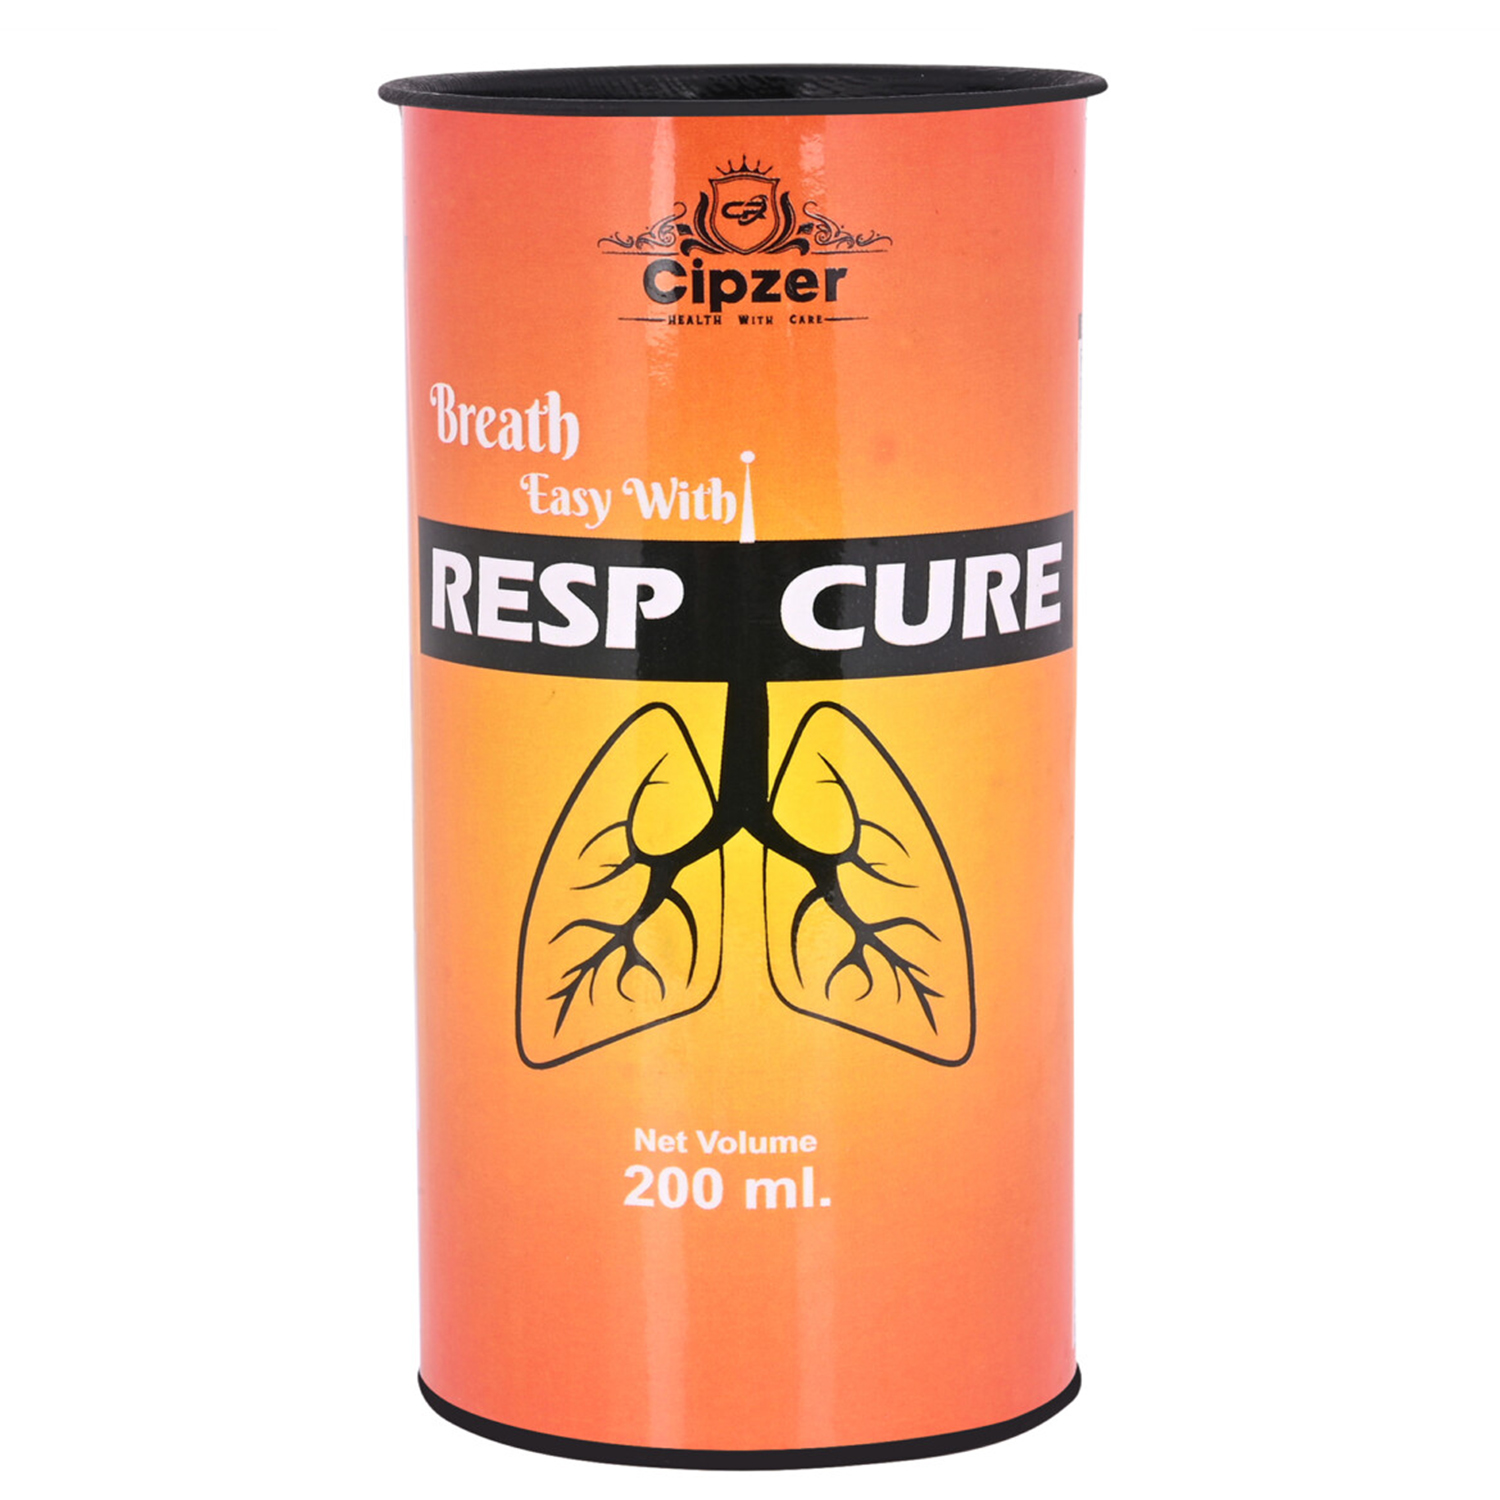 Buy Cipzer Respicure Syrup at Best Price Online